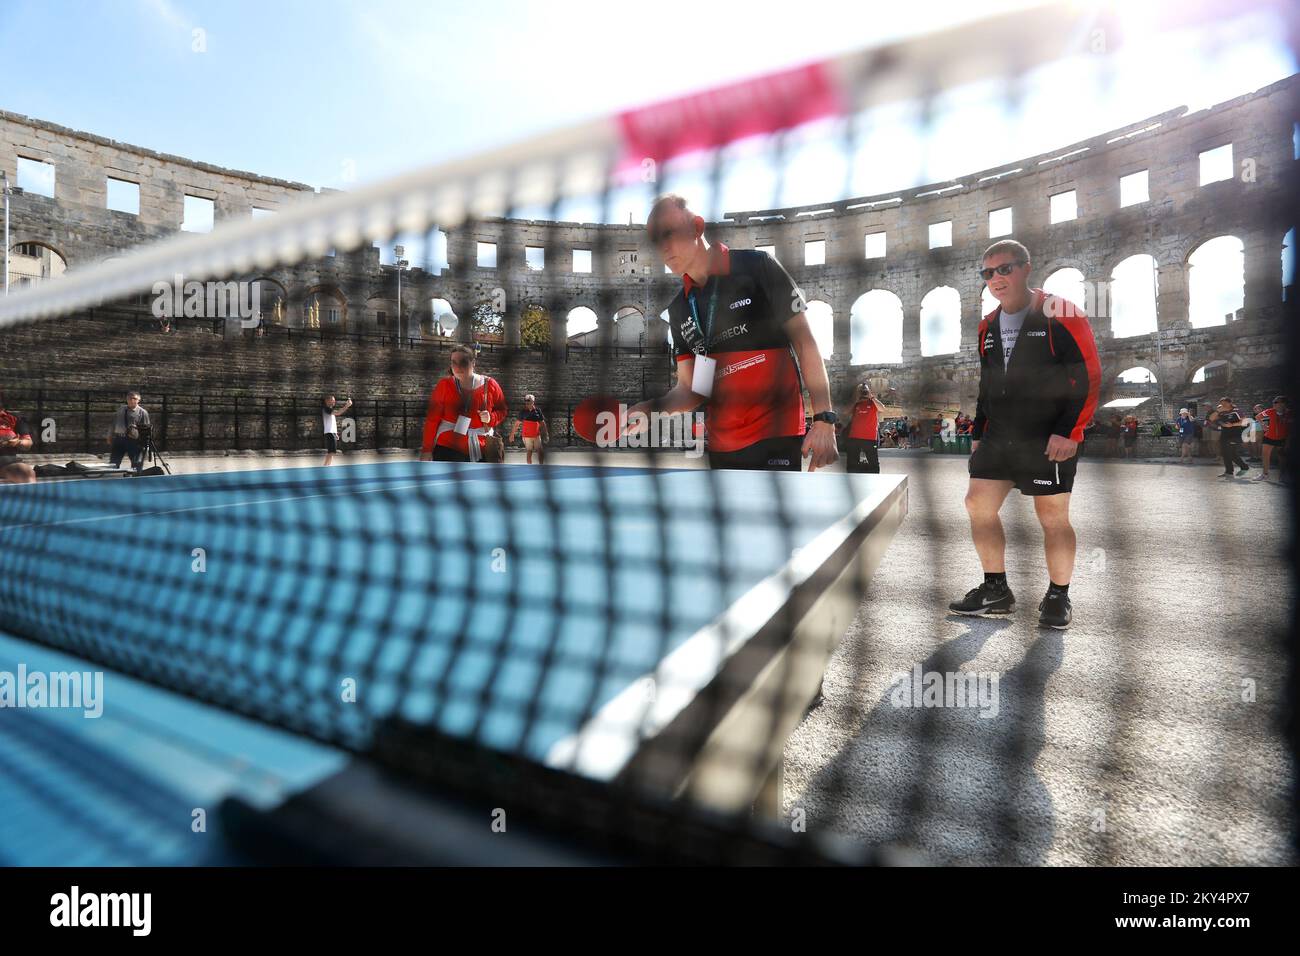 Opening of the 2022 ITTF Parkinson's World Table Tennis Championships in Pula Arena, in Pula, Croatia, on October 12, 2022. This competition is open to all athletes with Parkinson's disease, a brain disorder that affects the nervous system that makes the individual shake and suffer from stiffness which usually gets worse with age.Championship will be held from October 12 to 16. Photo: Sanjin Strukic/PIXSELL  Stock Photo